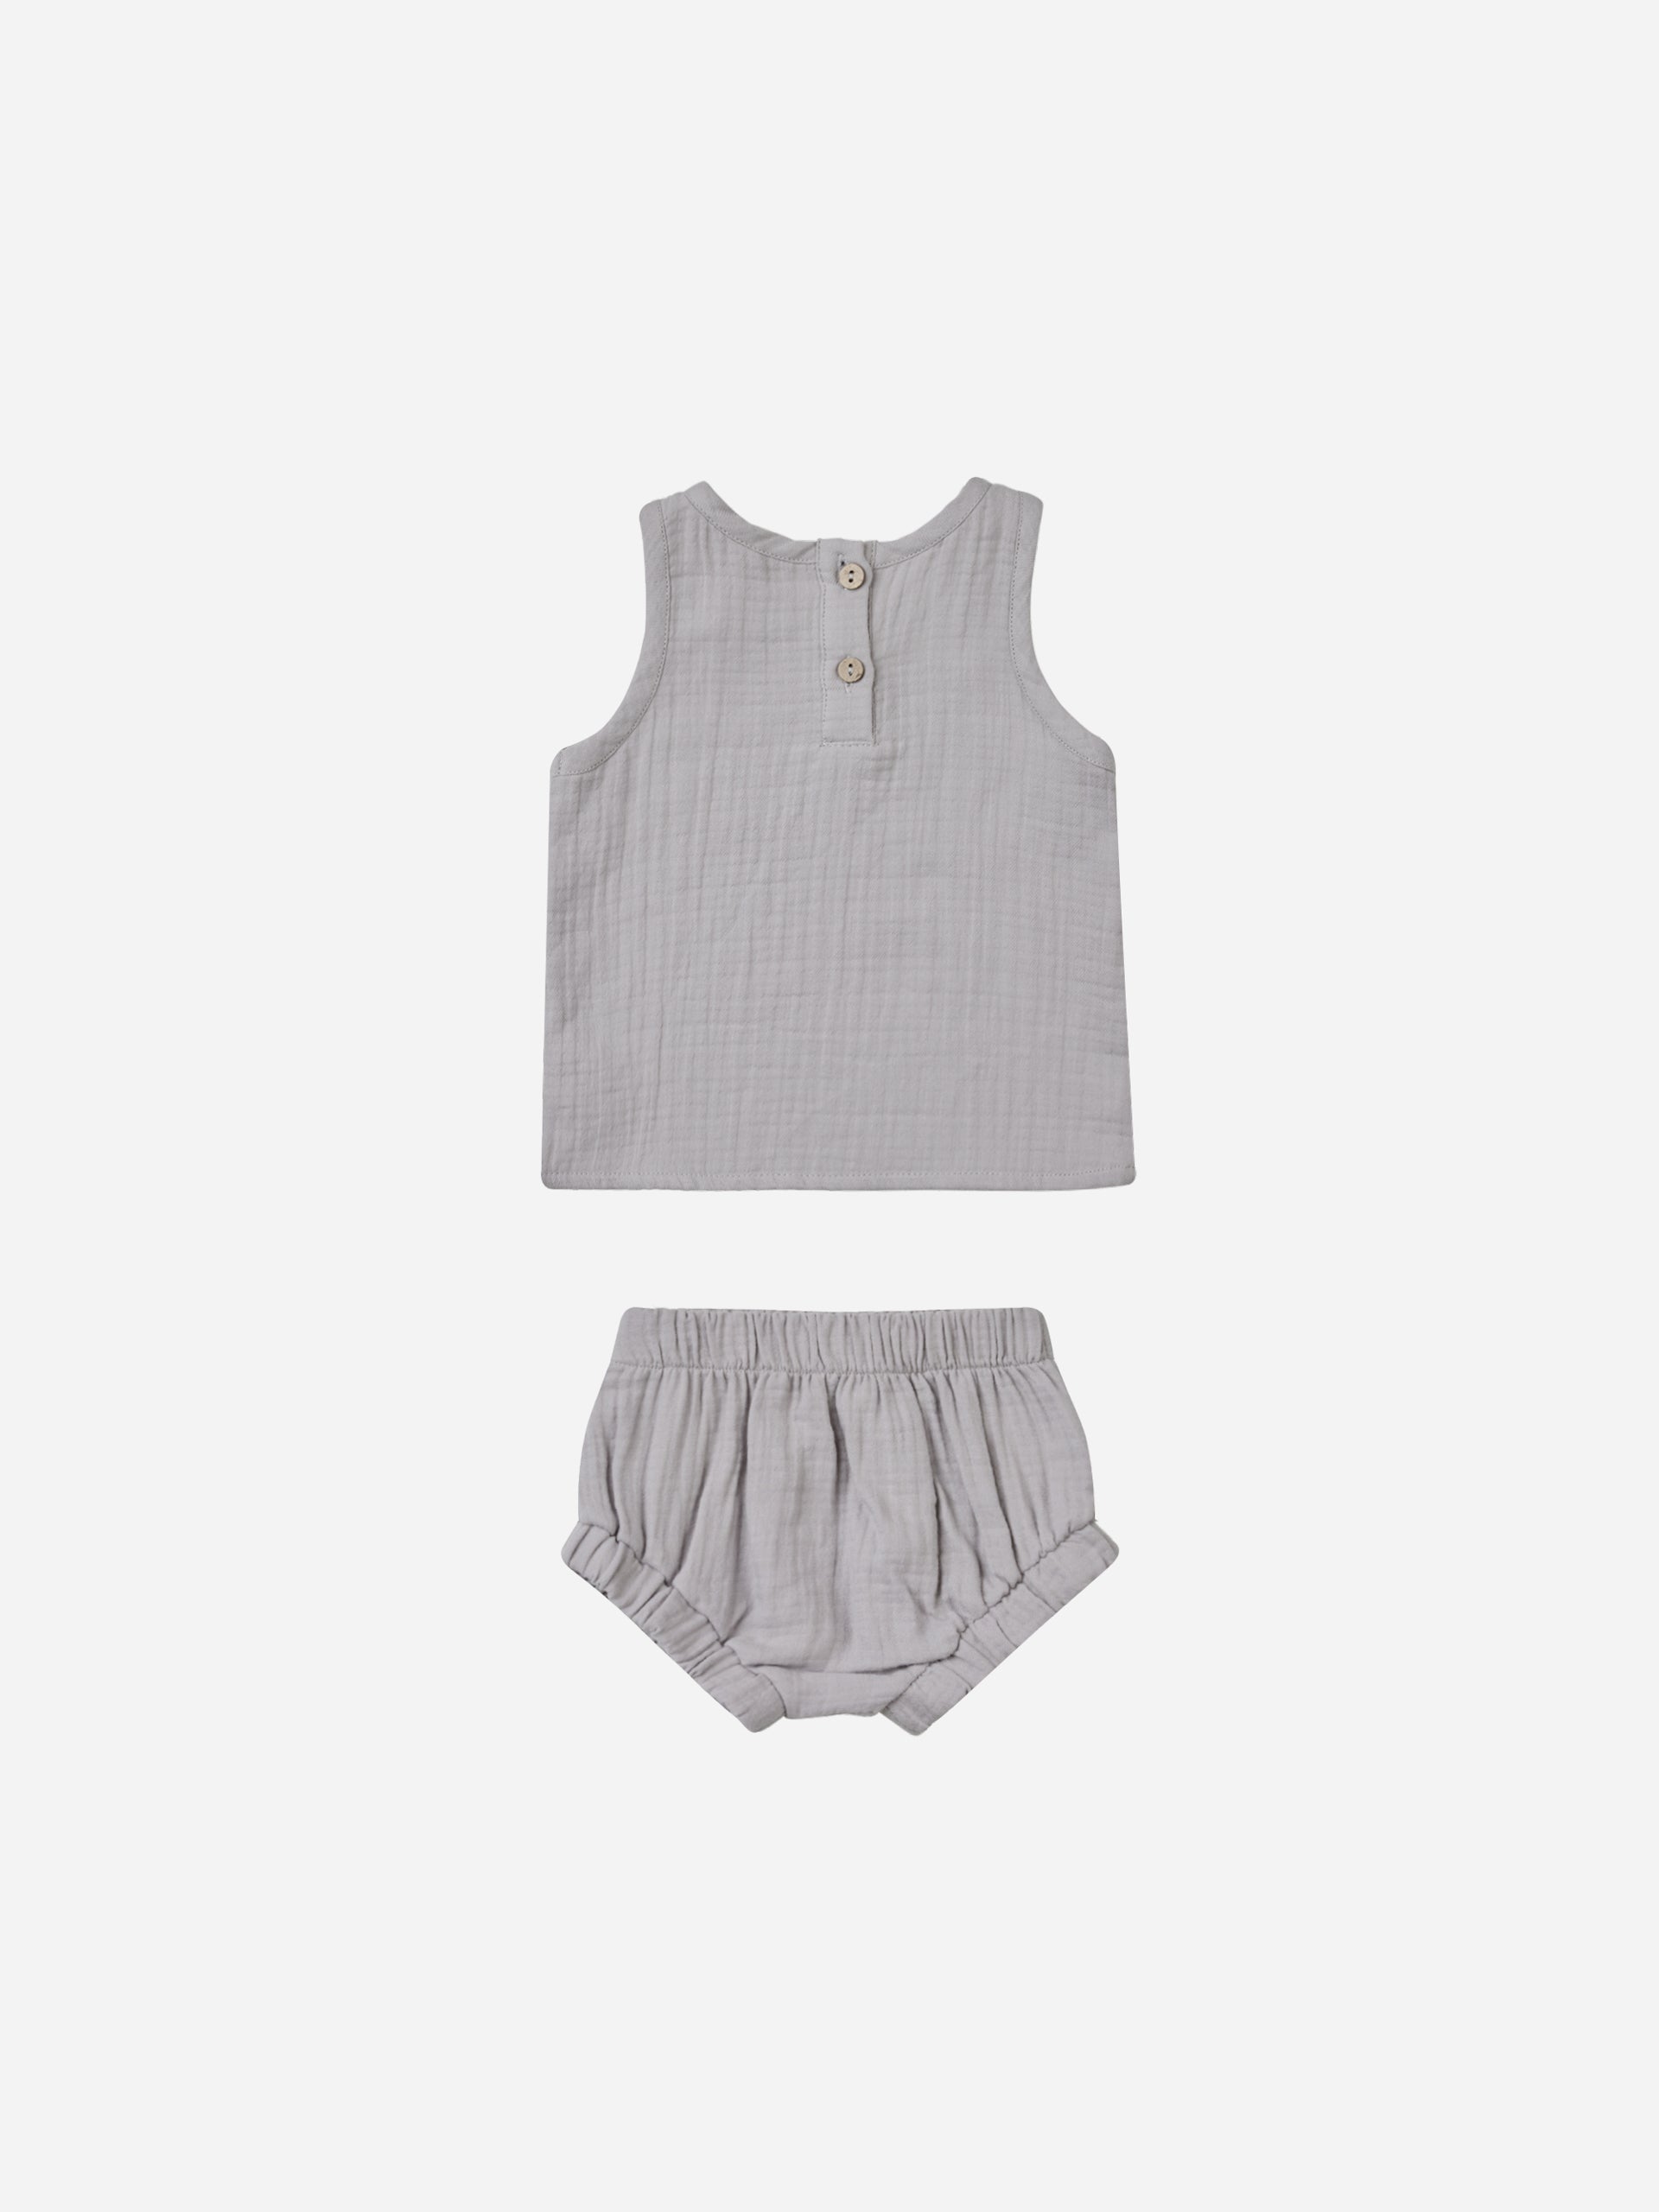 Woven Tank + Short Set || Periwinkle - Rylee + Cru | Kids Clothes | Trendy Baby Clothes | Modern Infant Outfits |